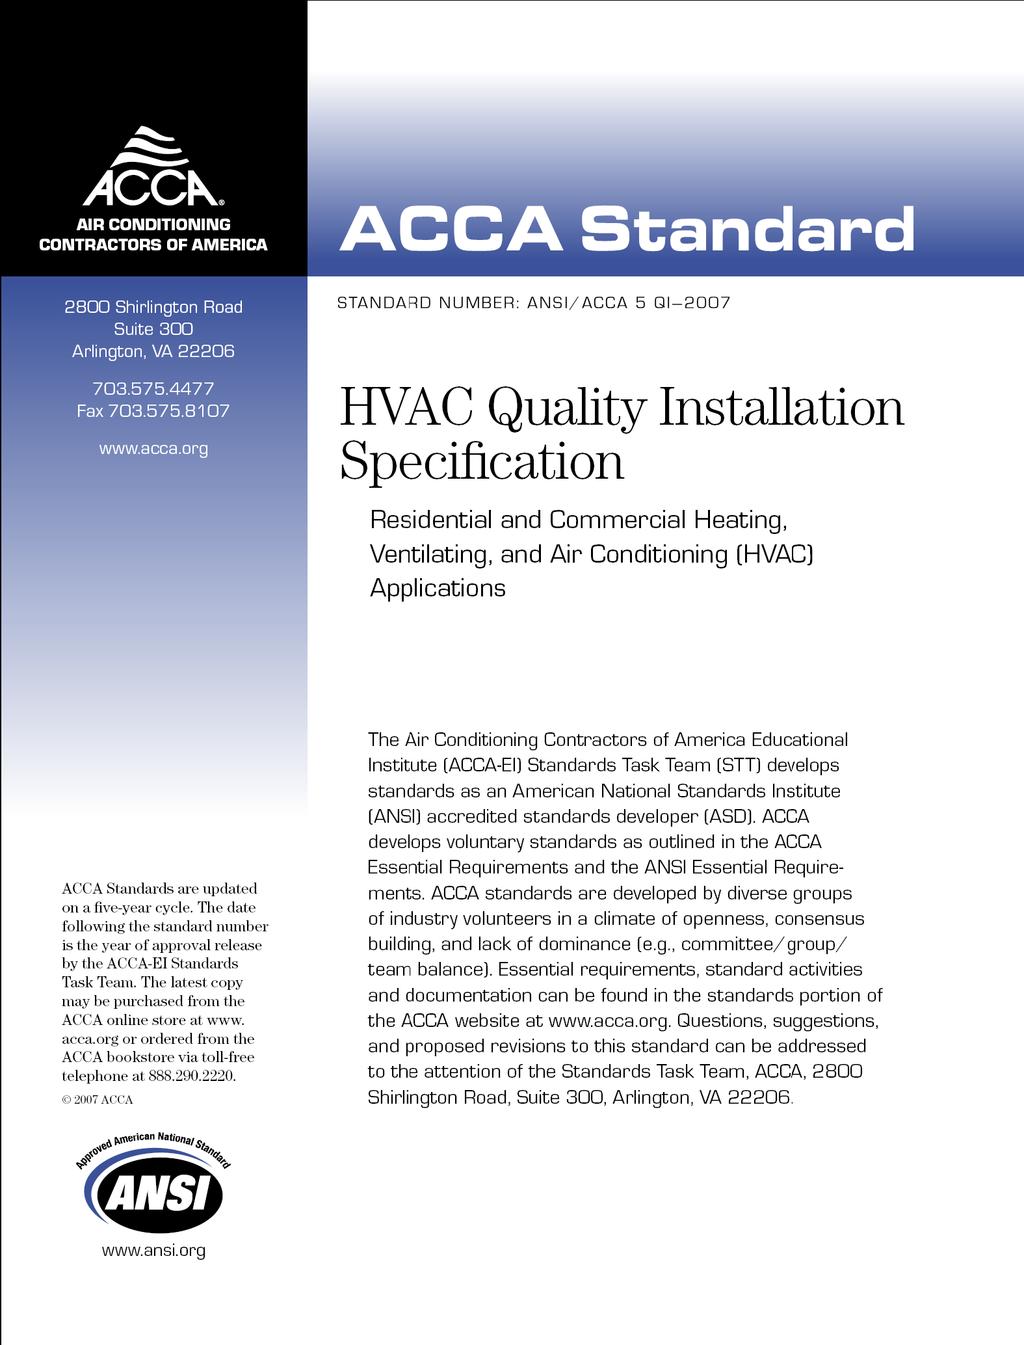 The Industry-recognized recognized HVAC QI